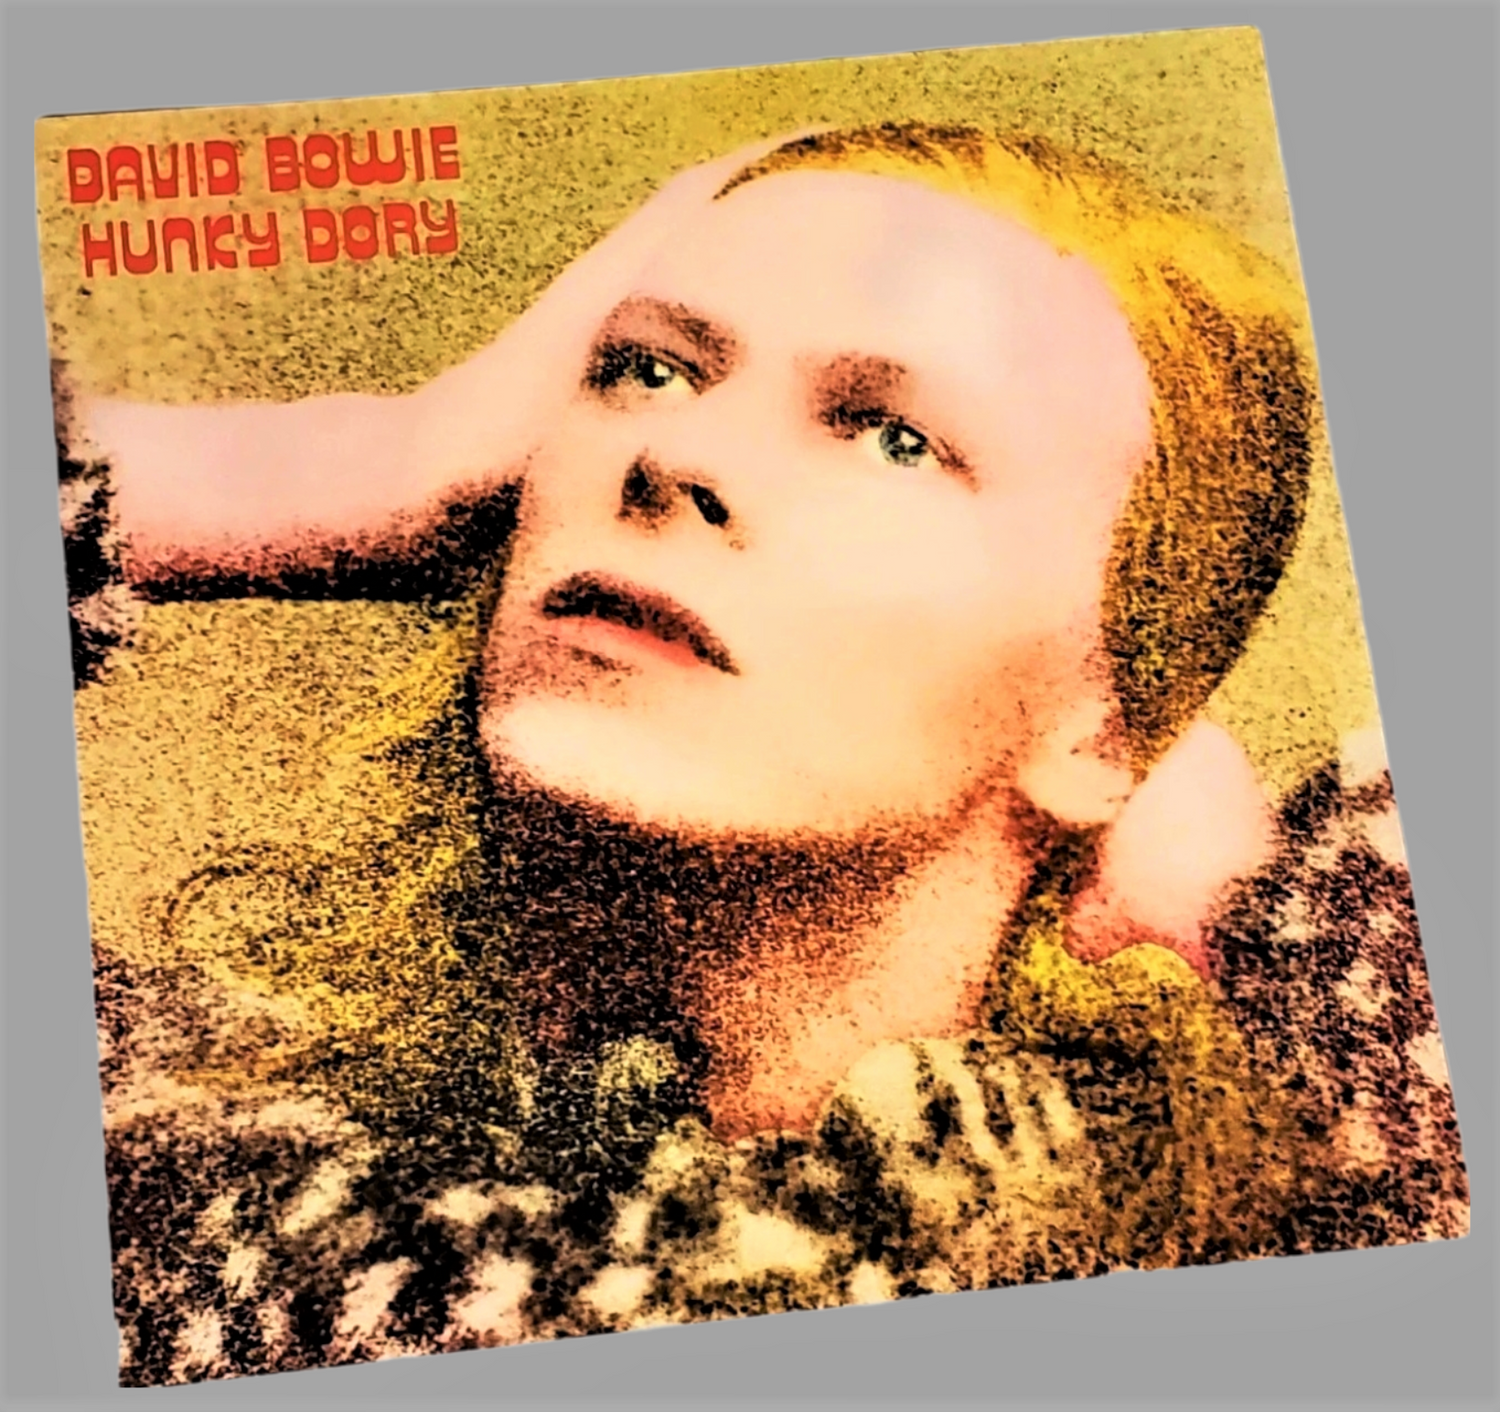 David Bowie 1970 Hunky Dory album cover art page featured in Rock Covers 2014 coffee table book available in area51gallery